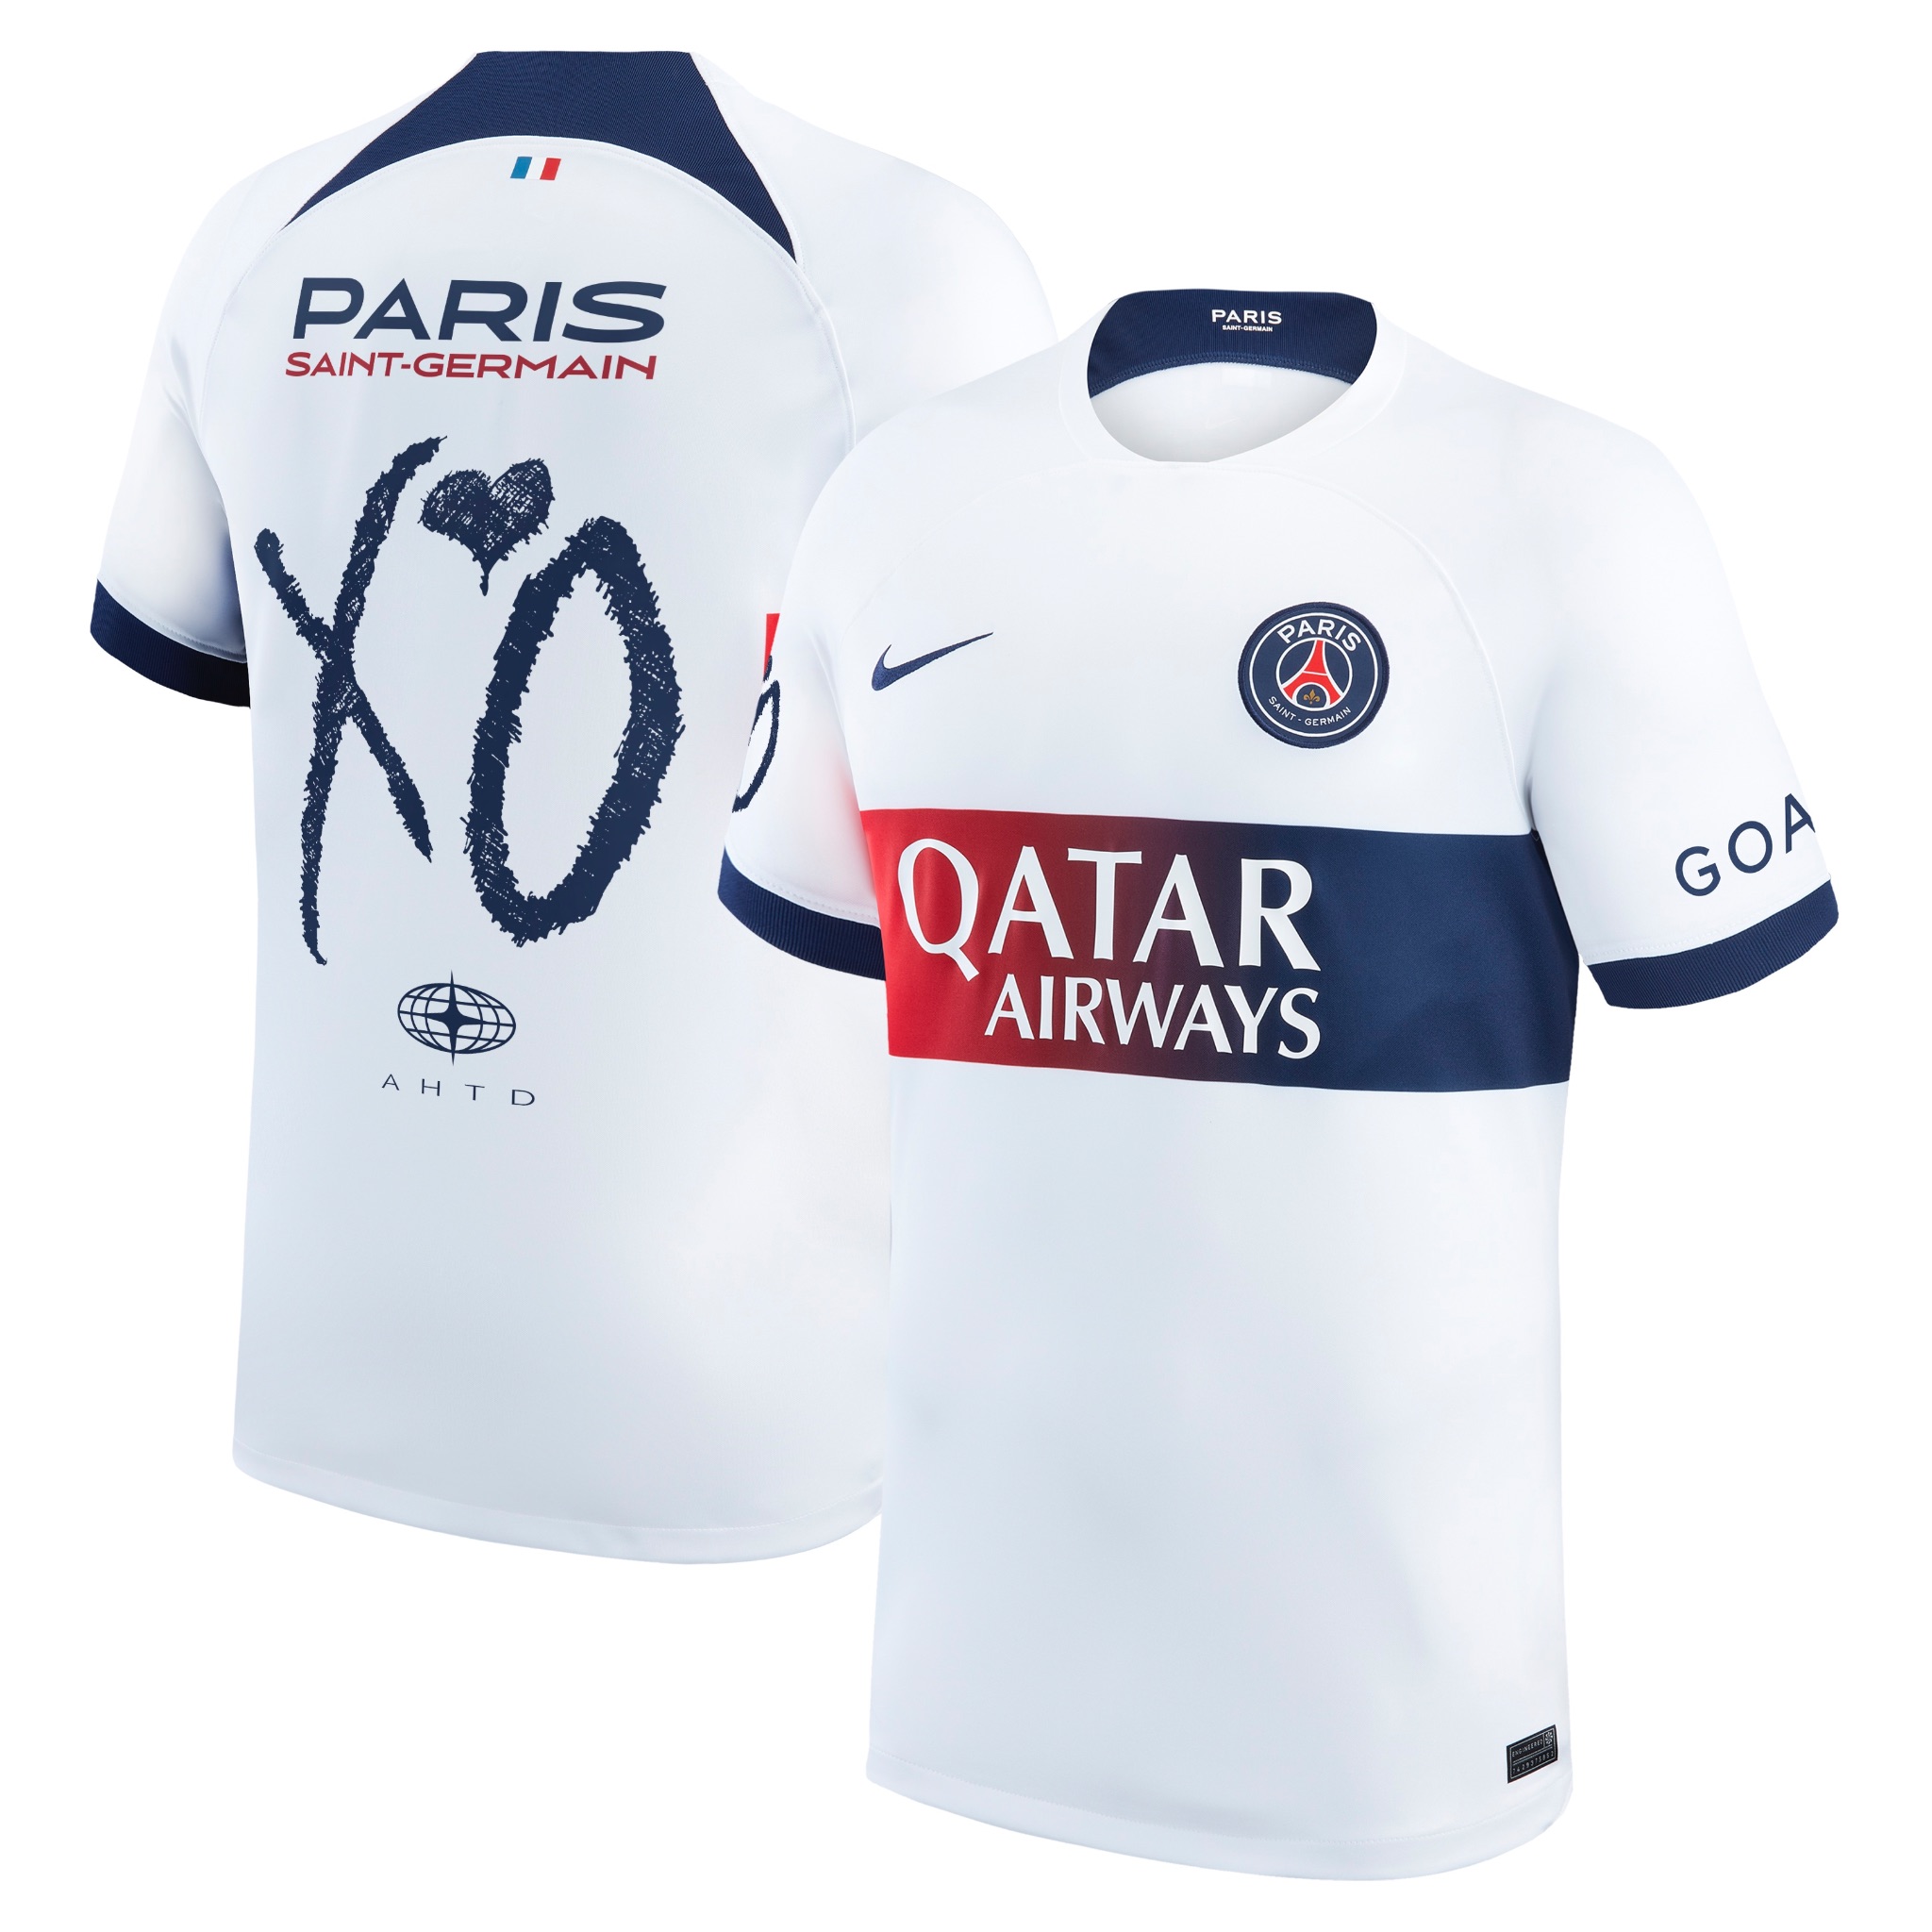 The Weeknd & XO Team with Paris Saint-Germain for New Jersey